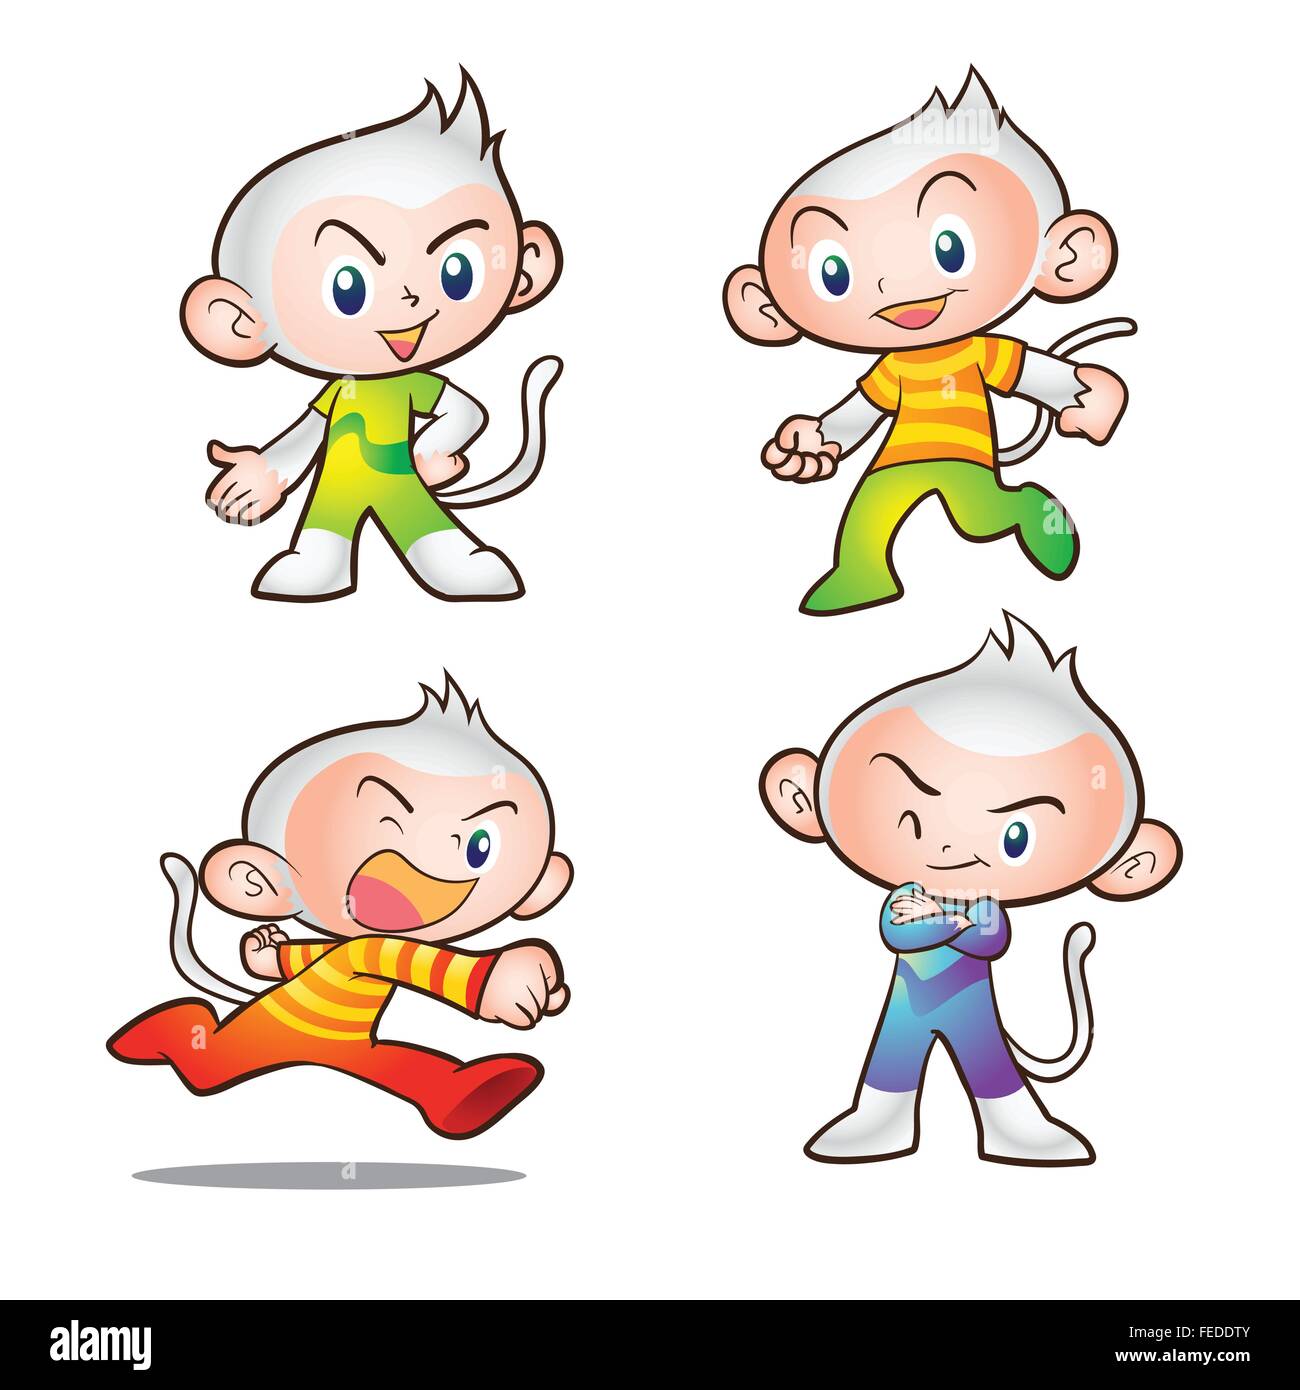 kids monkey mascot character.Cartoon happy monkey collection with different actions. Stock Vector